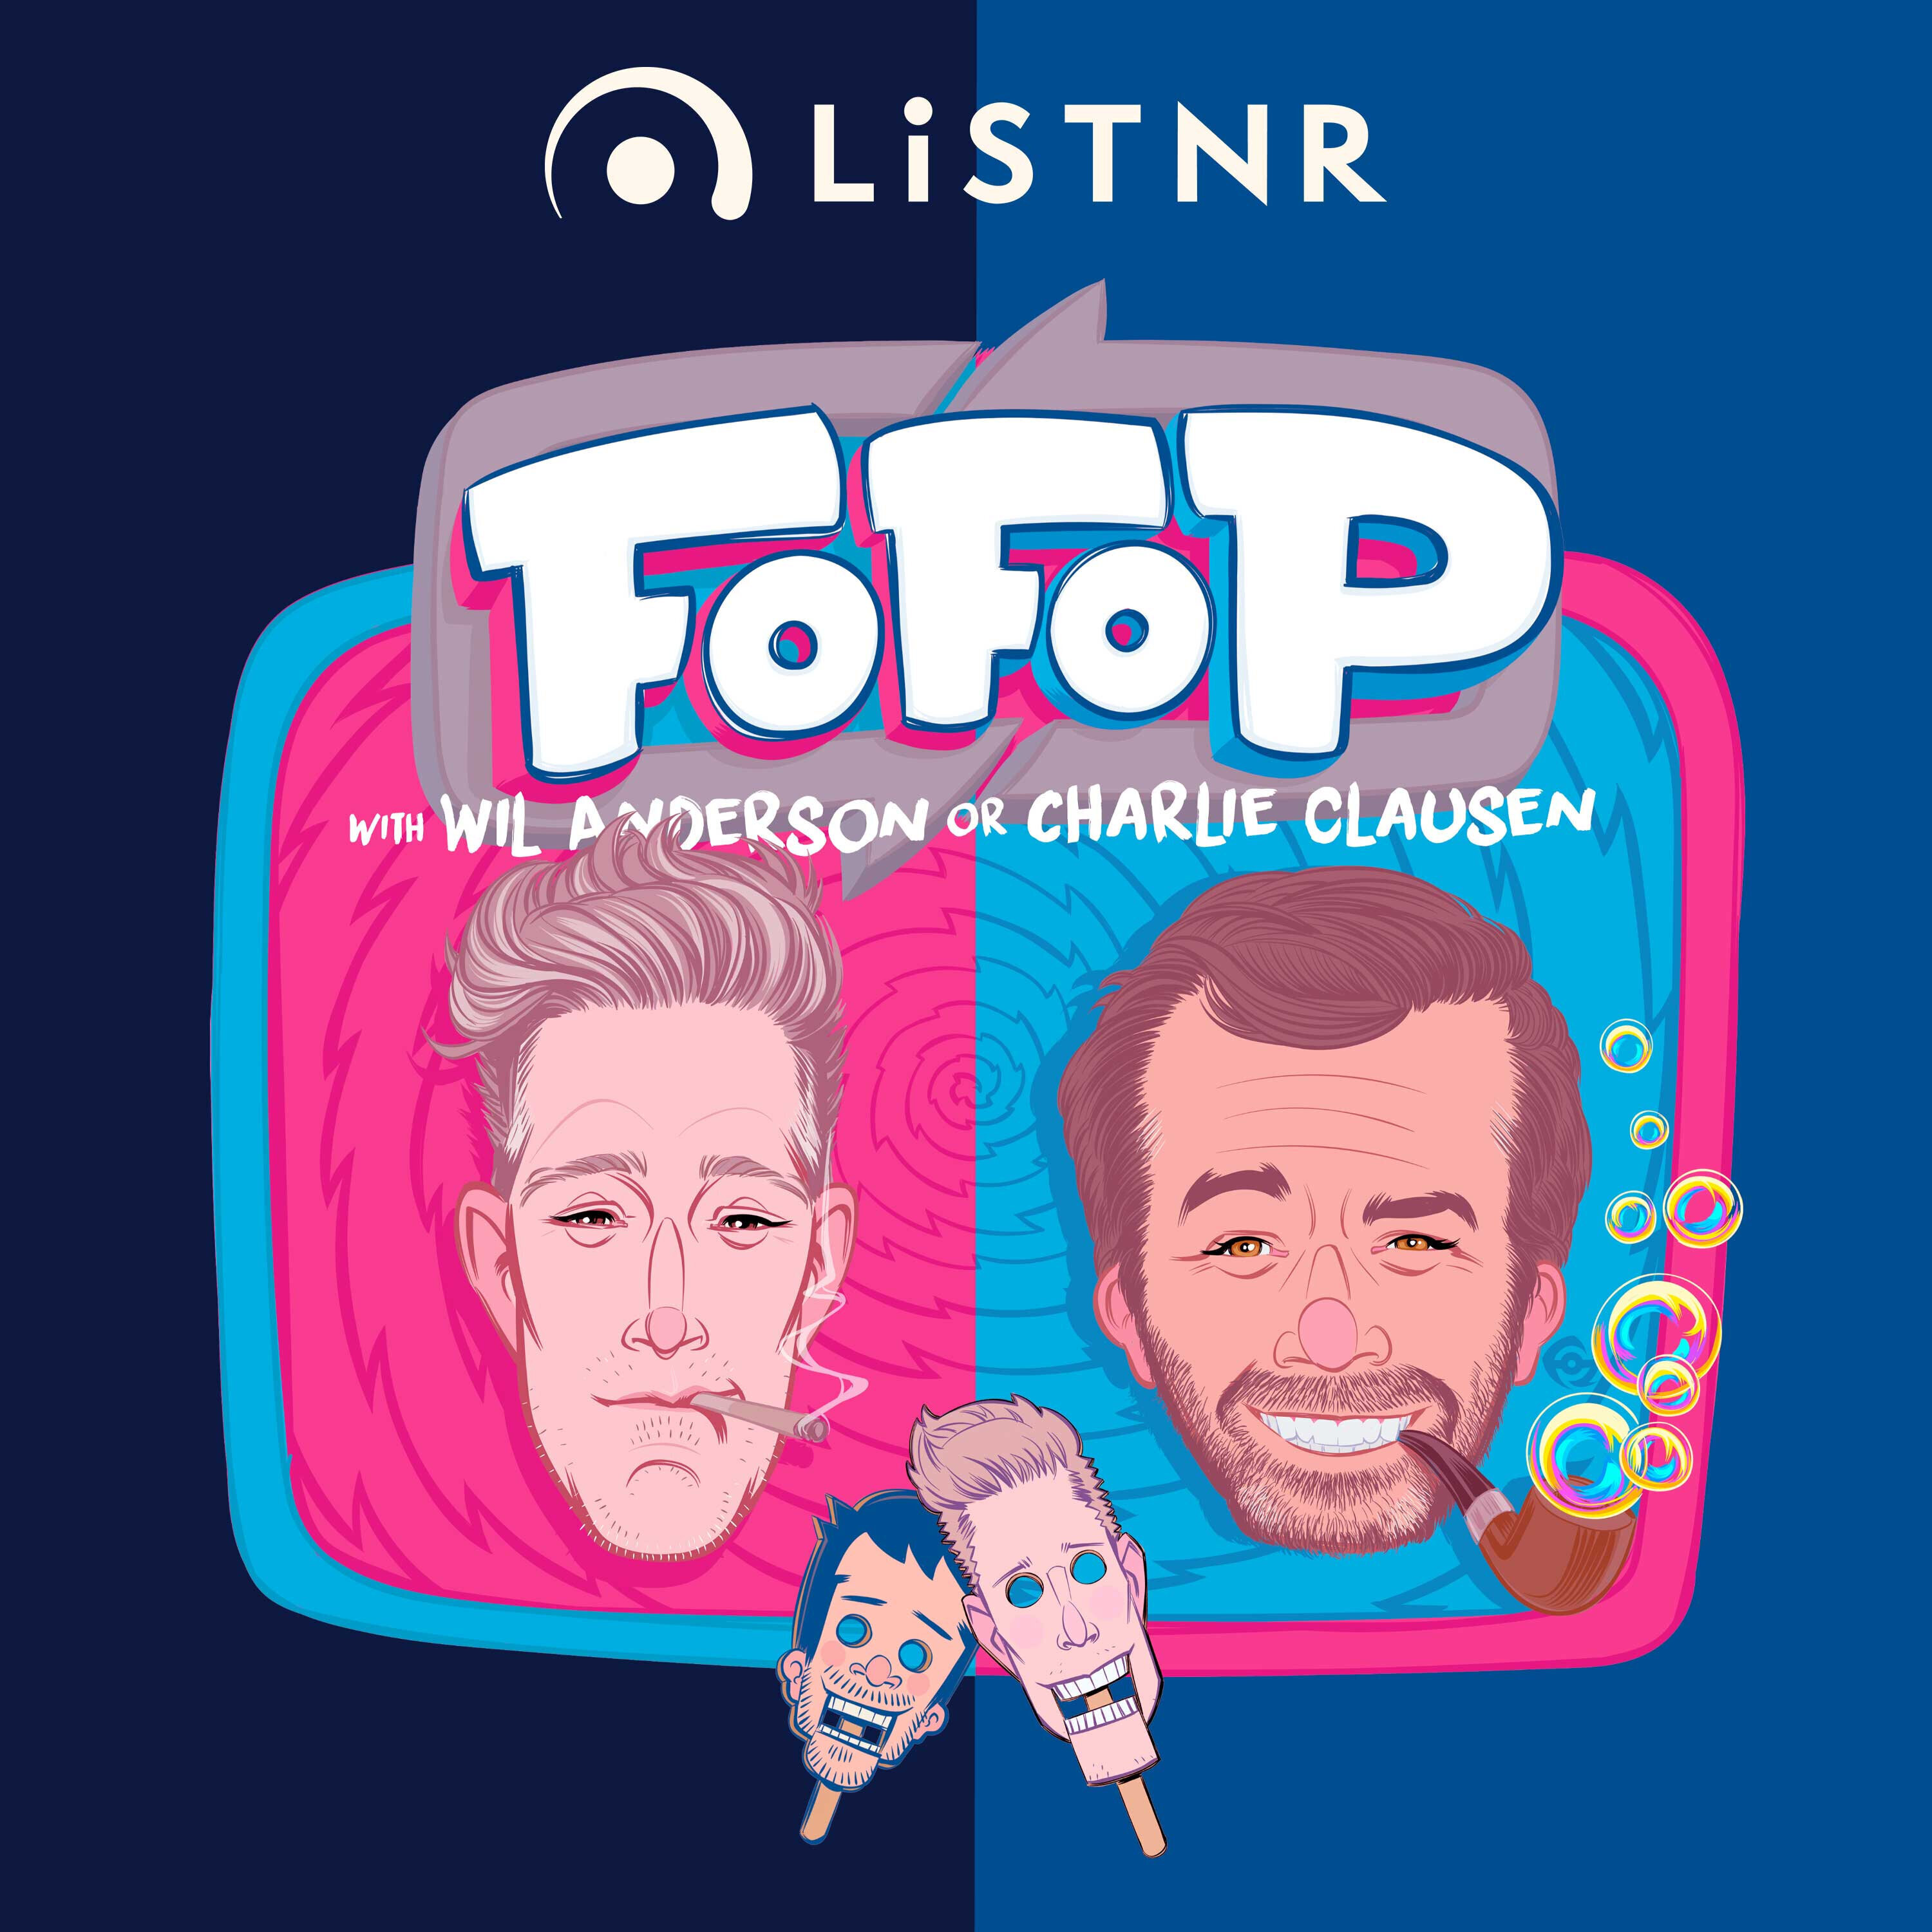 FOFOP 419 — 800 Metre Football Field (with Michael Chamberlin)